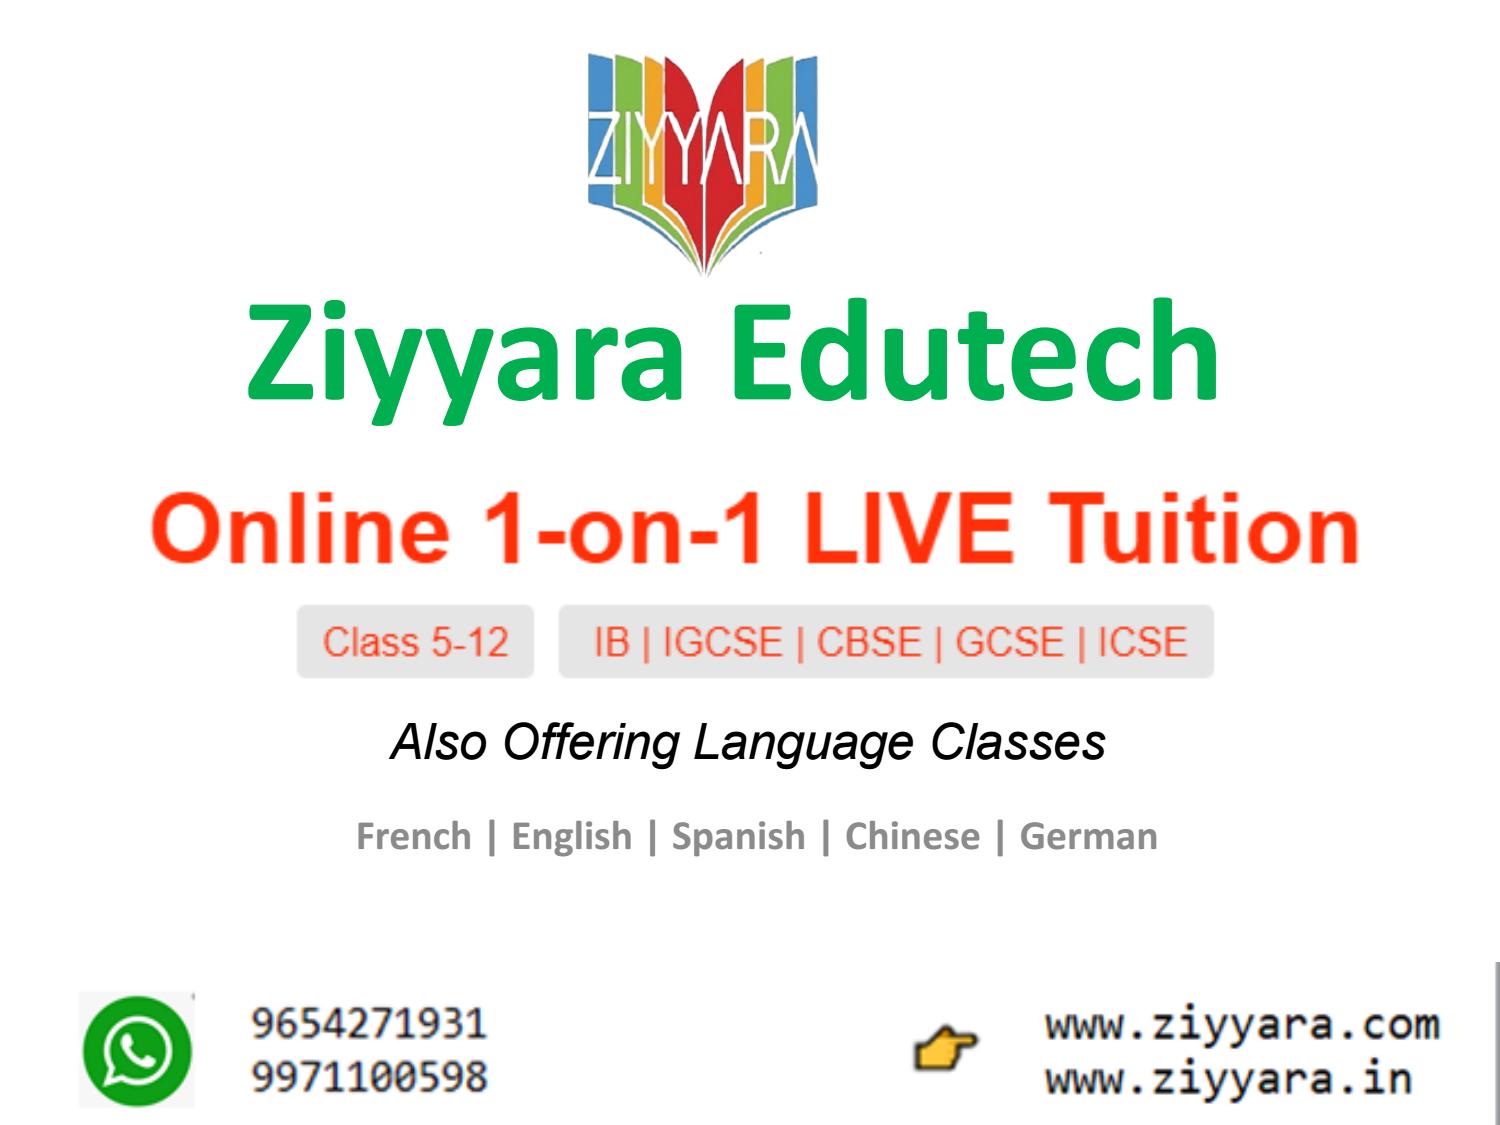 Best Online Tuition Classes in India – Get a Free Demo